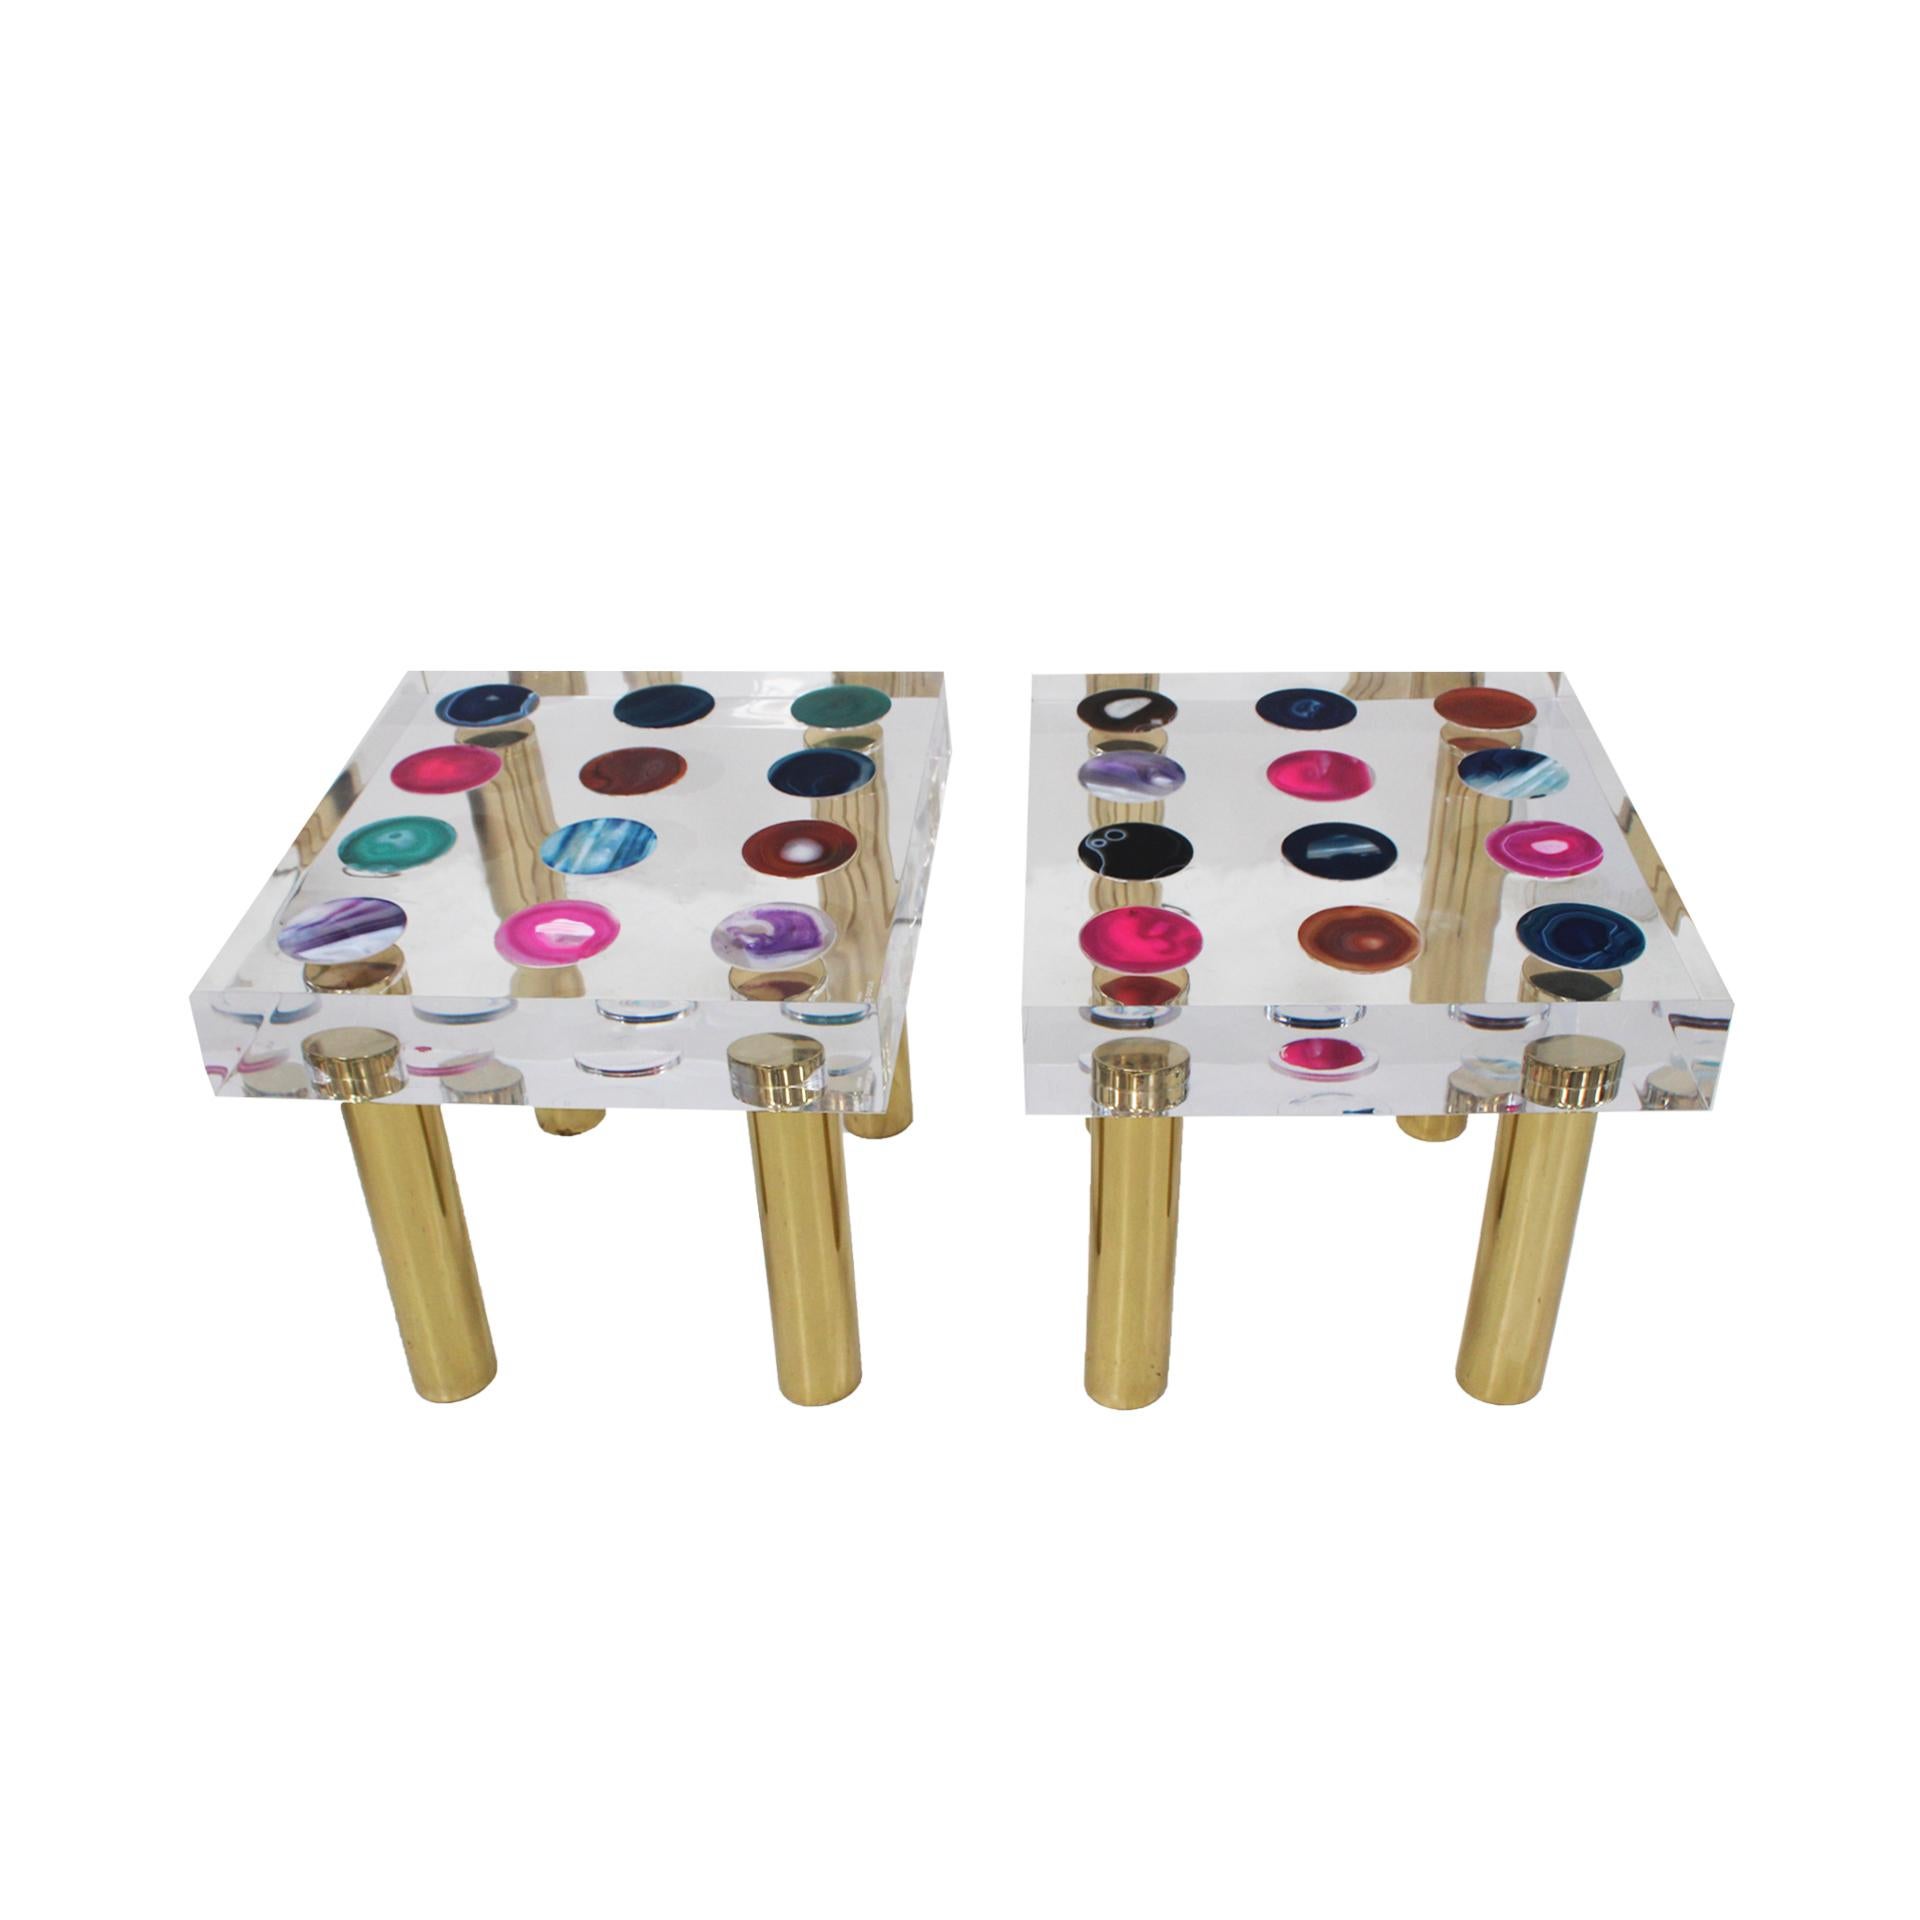 Side tables designed and produced by Studio Superego. Made of plexiglass of ten centimeters thickness, with agates inlaid and legs in brass. Made in Italy.

The project Superego was born in 2003 within Movimento Moderno, a company working in design,